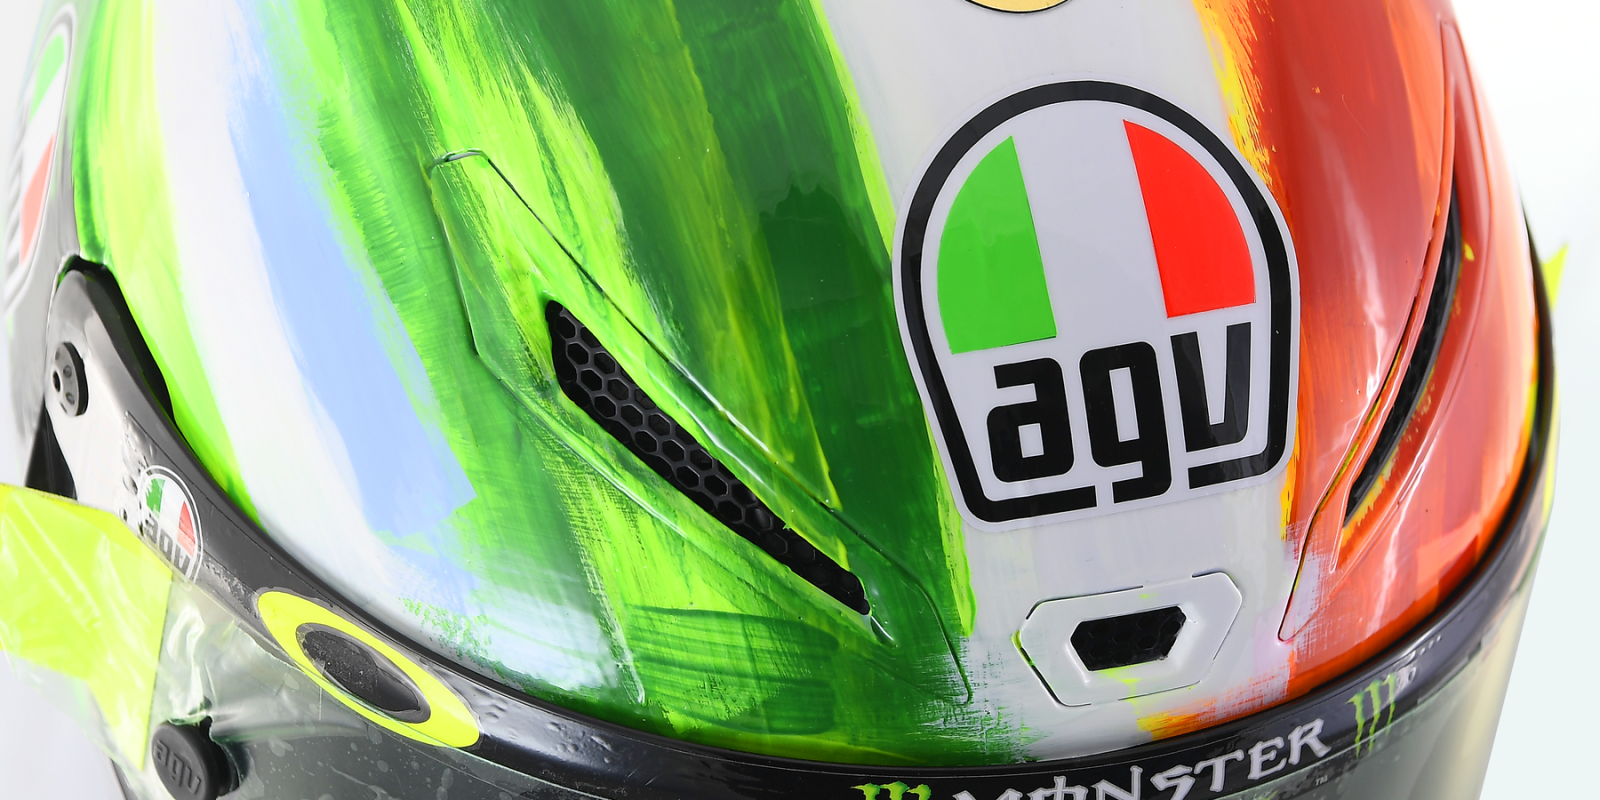 The 2019 Rossi Mugello helmet: the palette for a pacey 'artist'